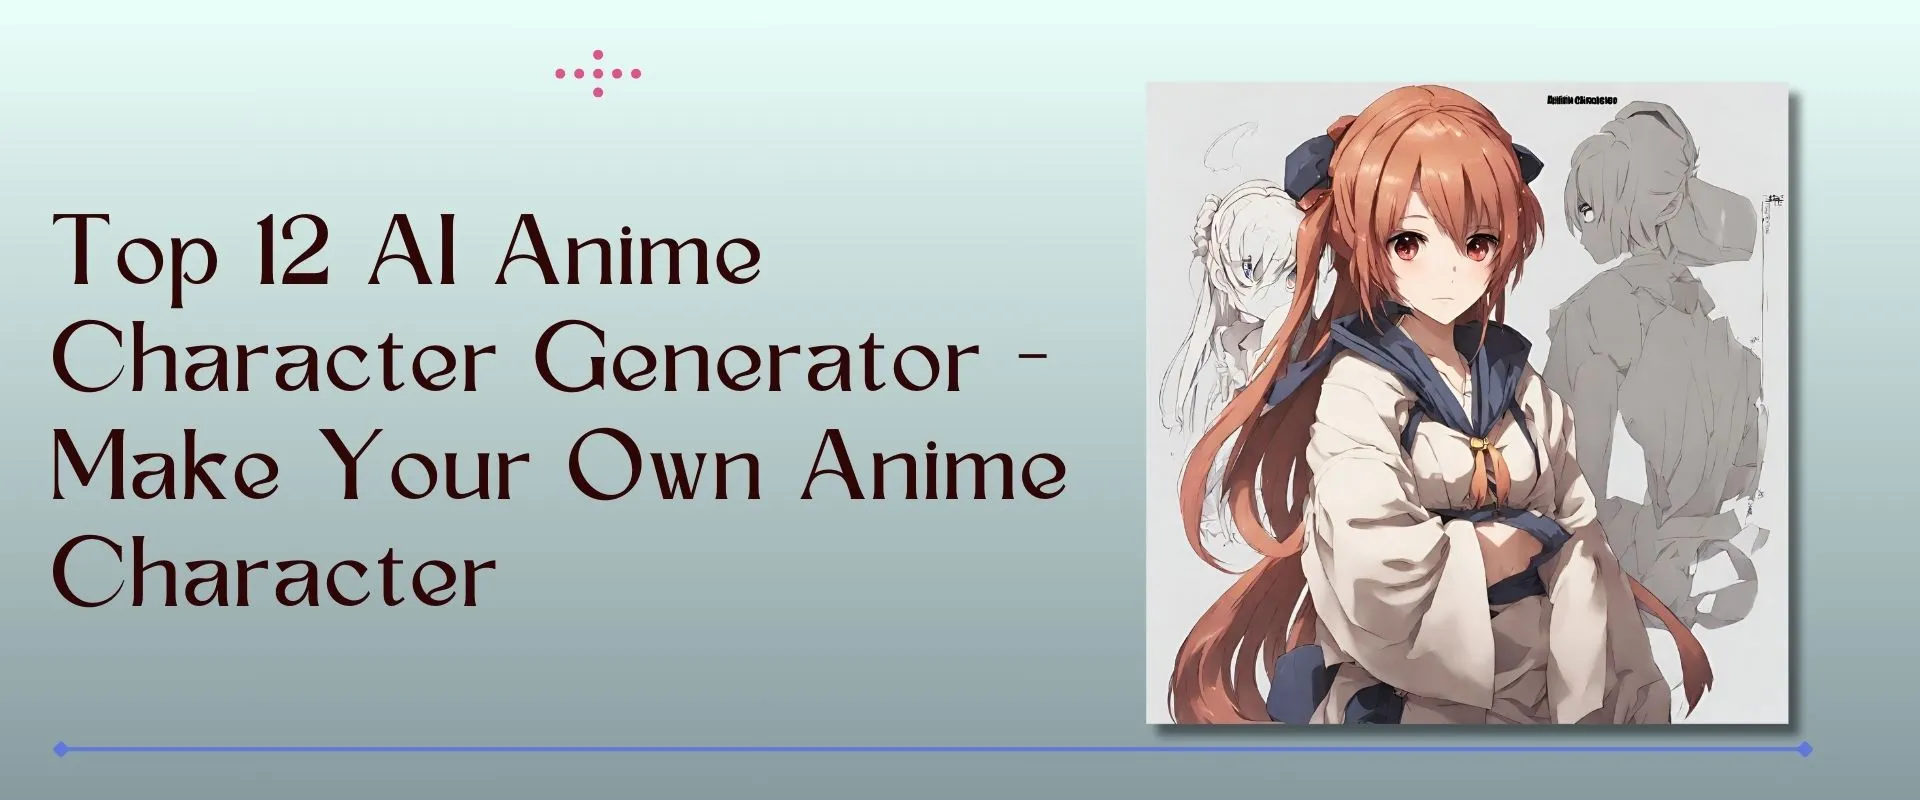 Top 12 AI Anime Character Generator – Make Your Own Anime Character